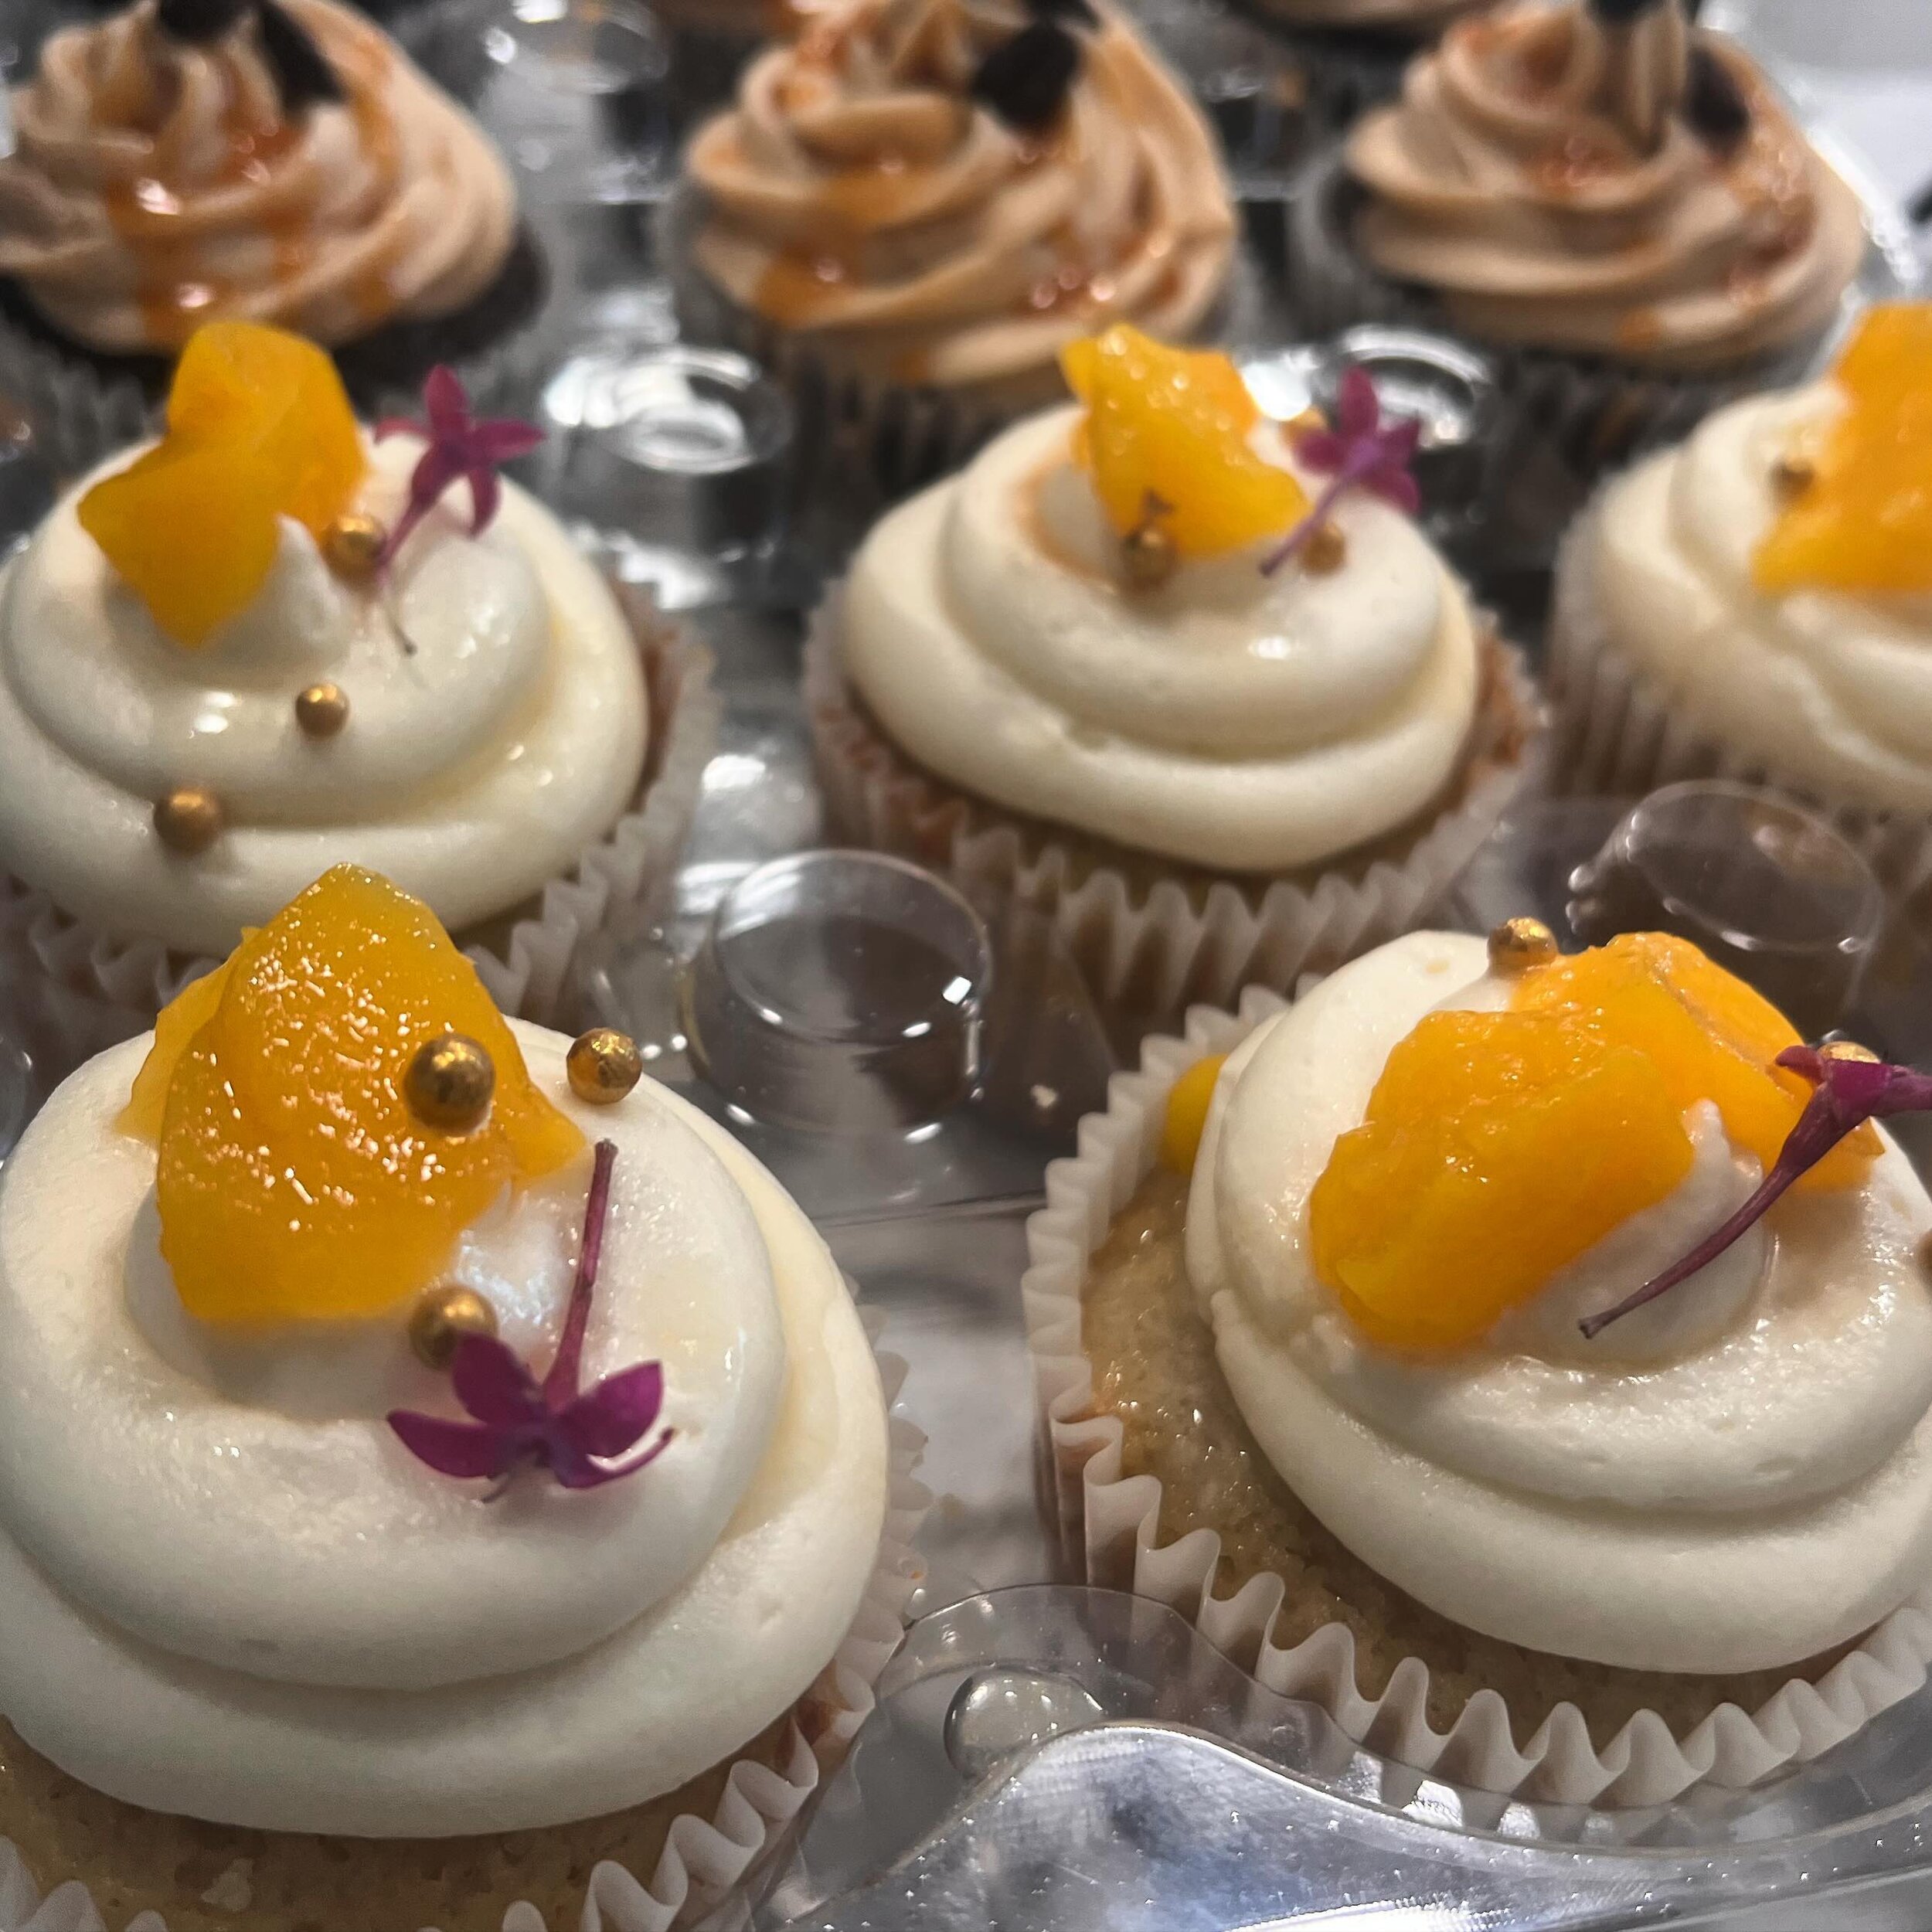 Some peach Bellini cupcakes from today headed to Philly 💫 🍑